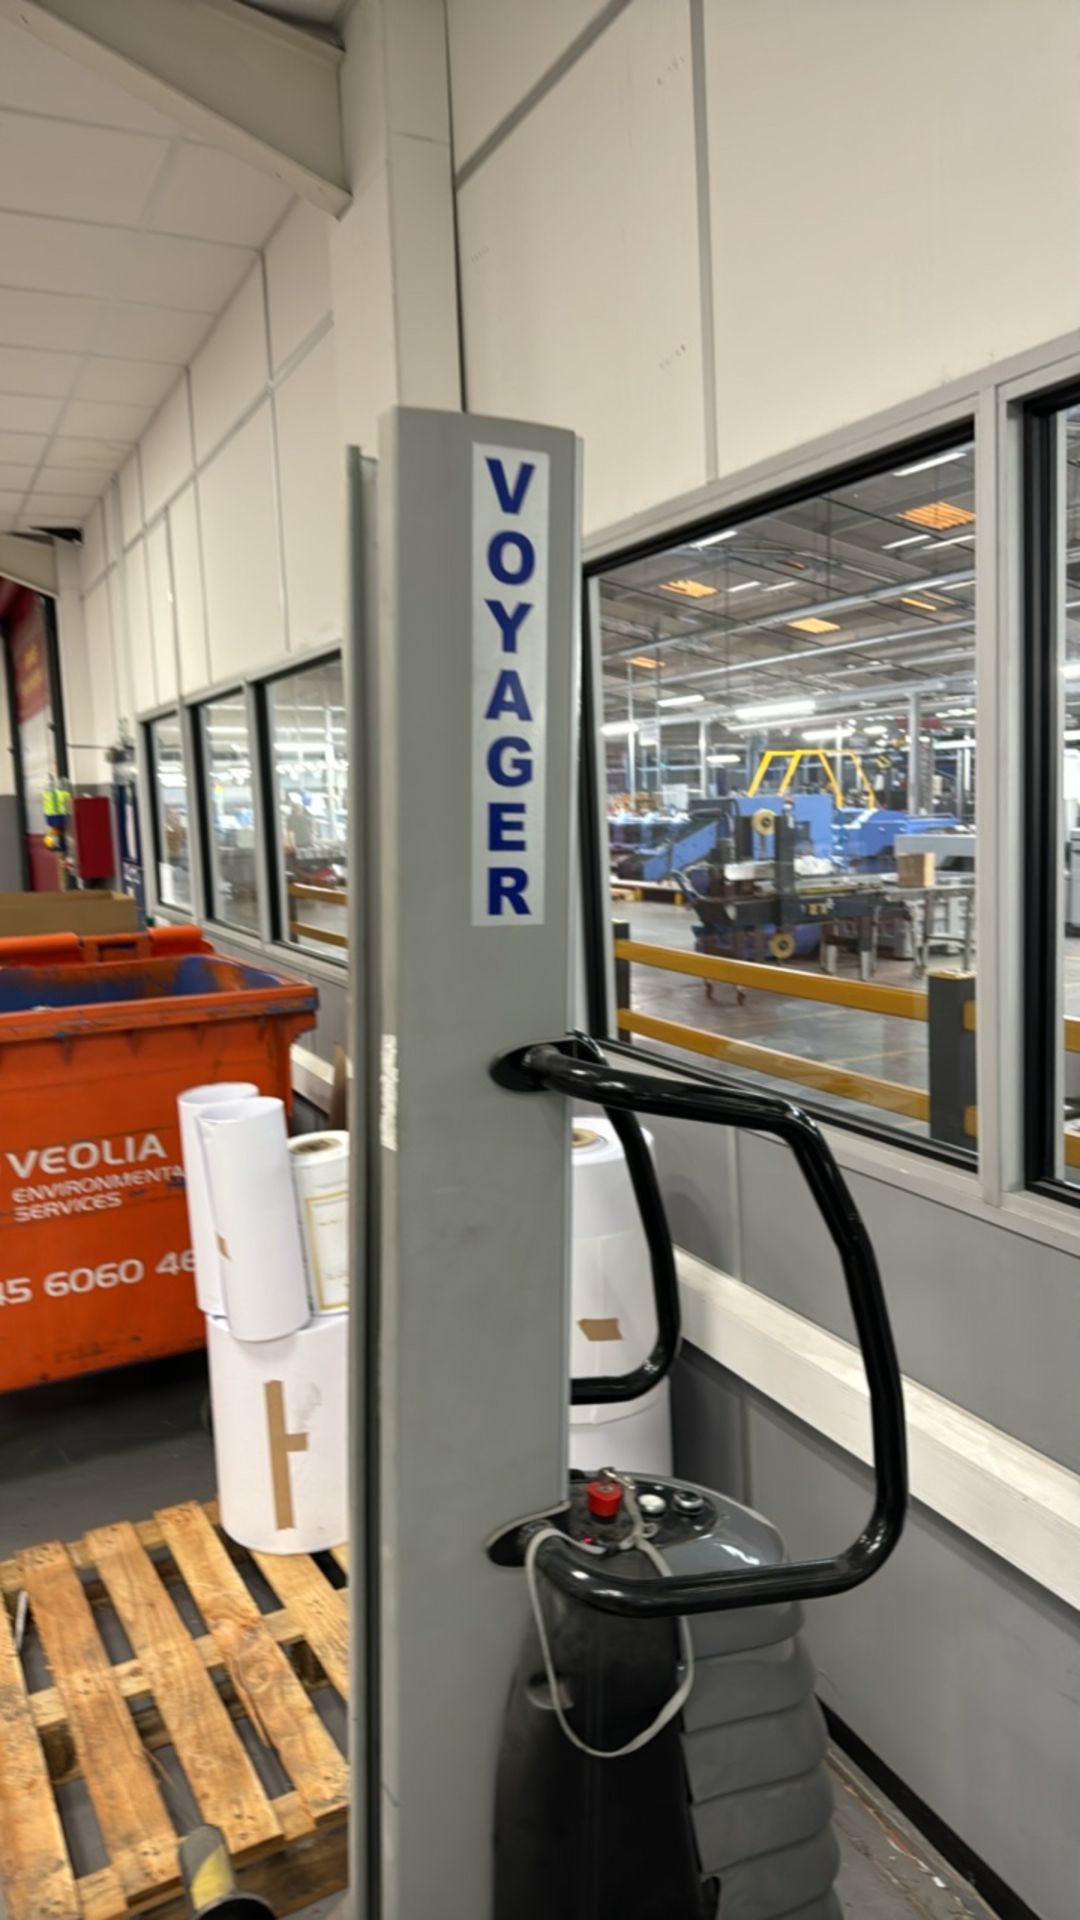 Voyager Electric Handling Lift - Image 5 of 9